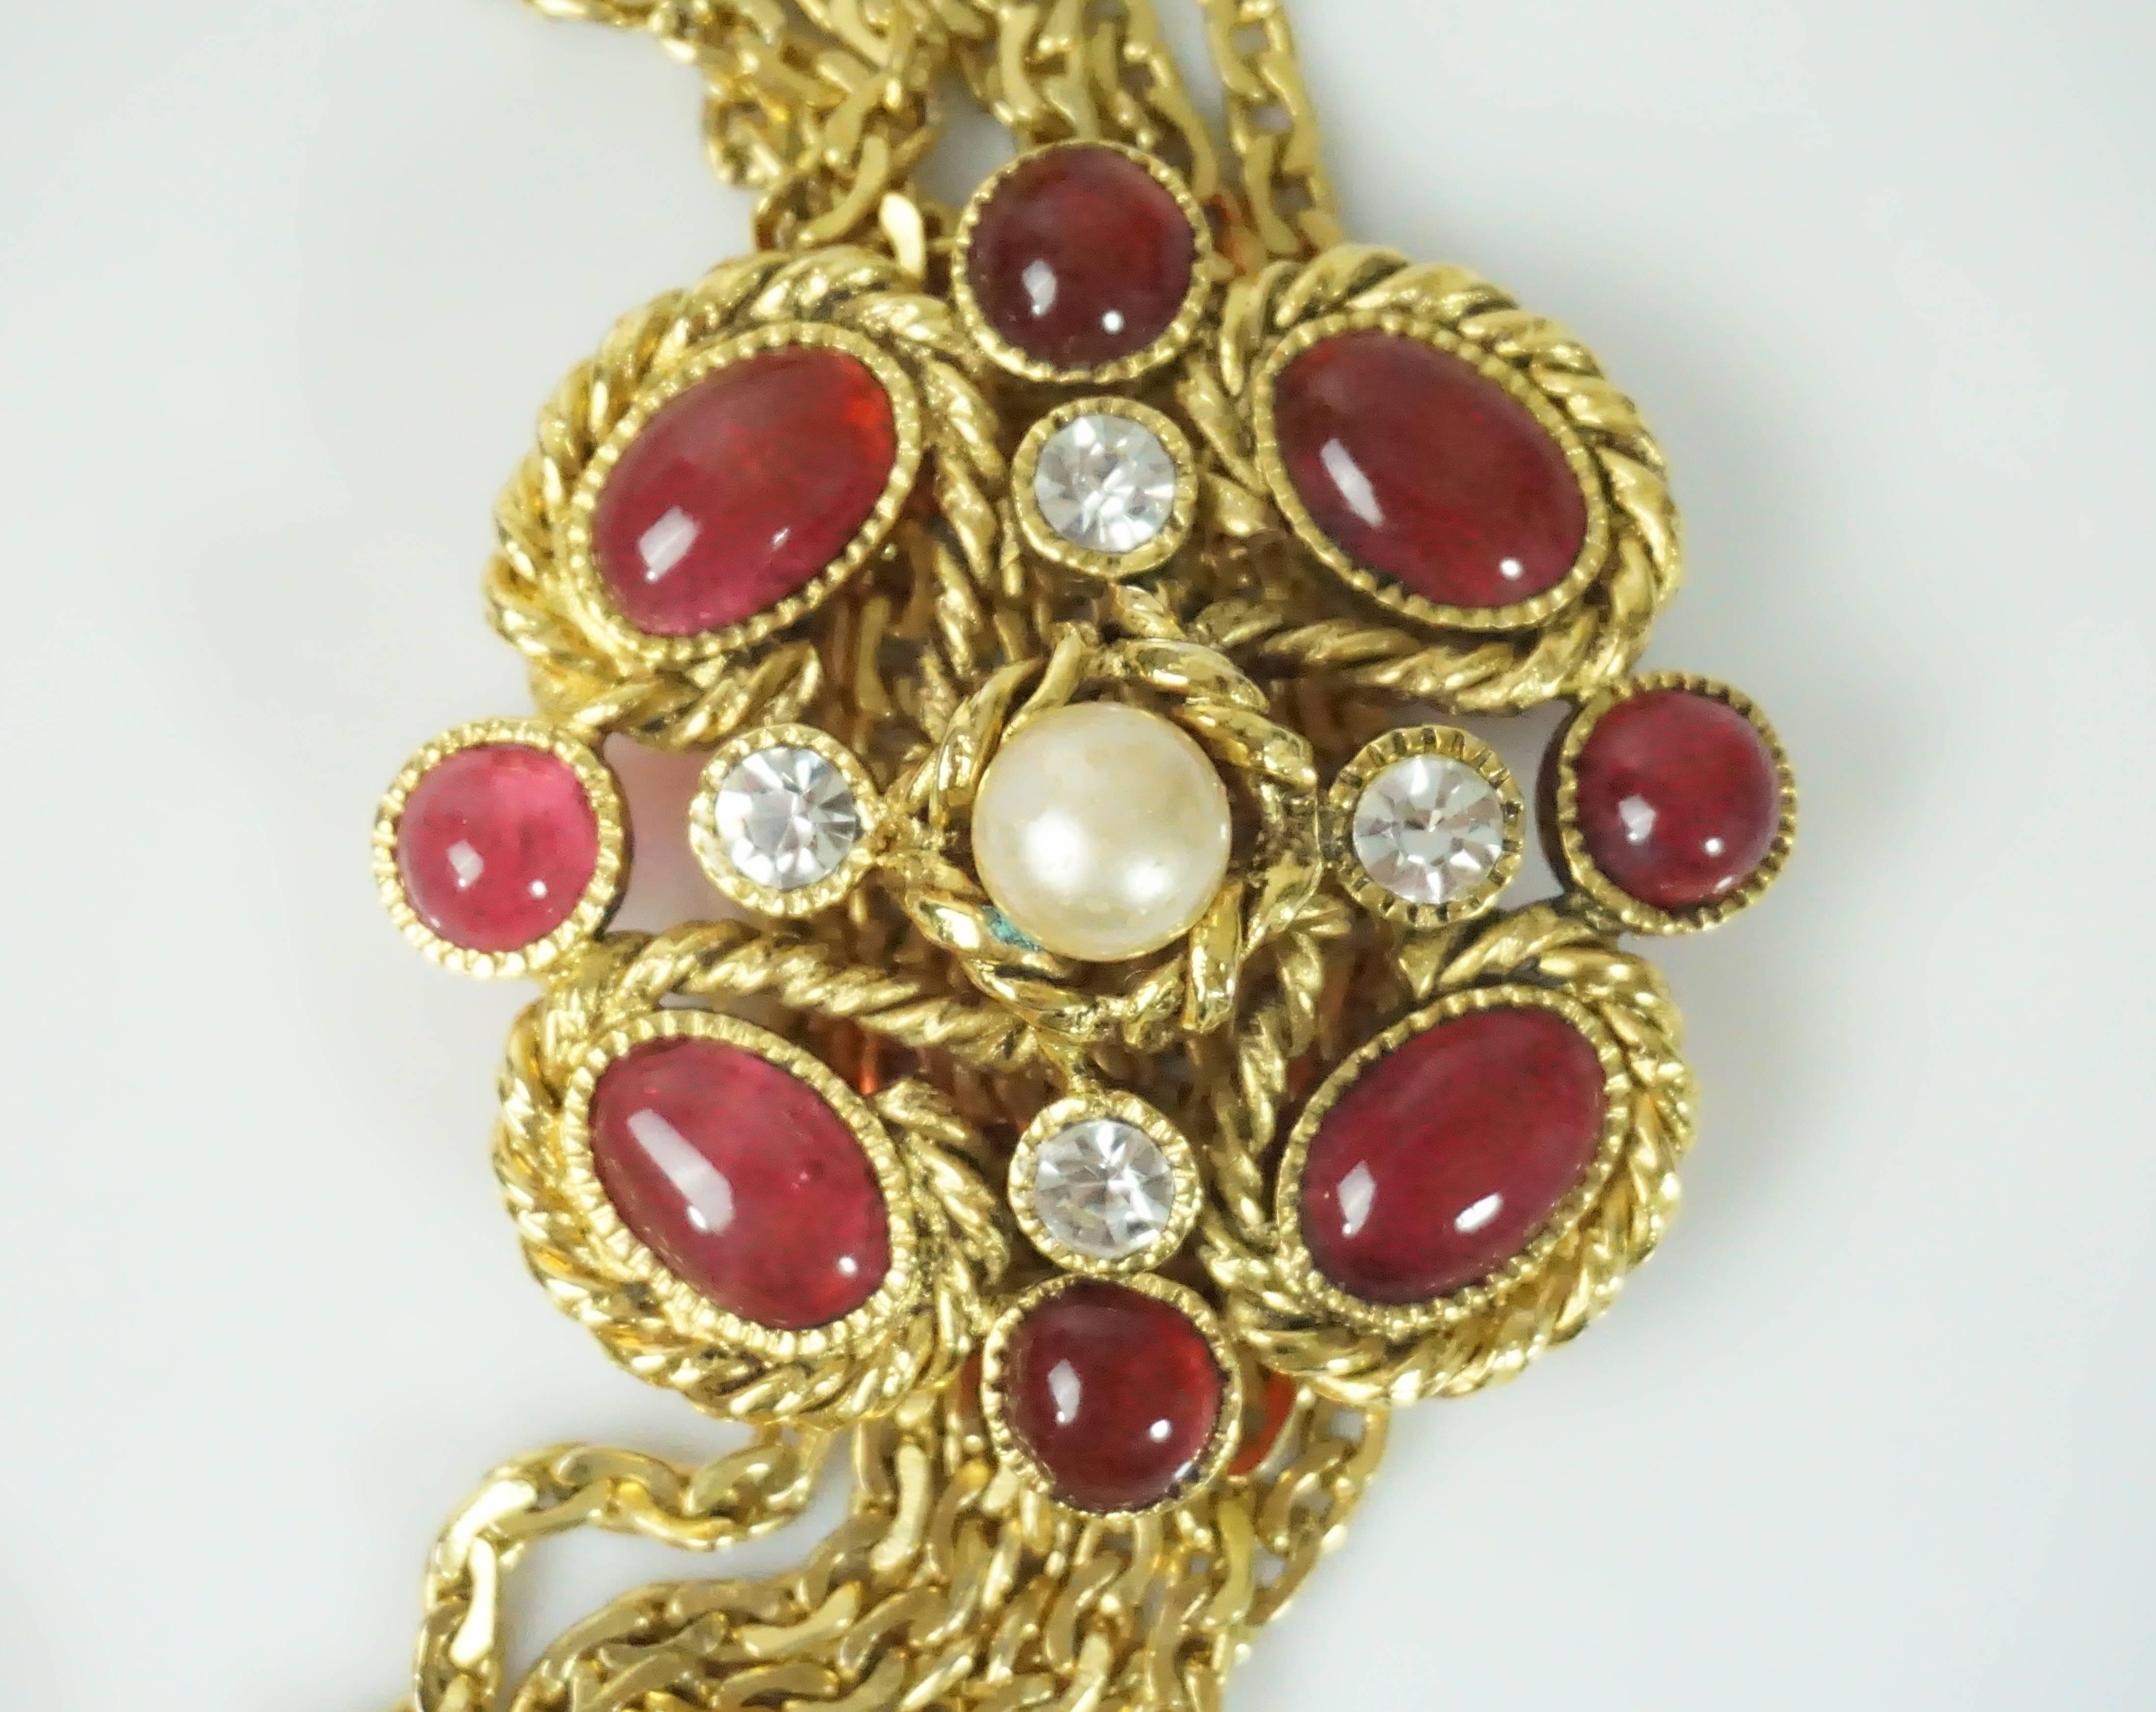 Women's or Men's Chanel Gold Chain Link Belt/Necklace with Gripoix and Pearl Camelias-Circa 70's